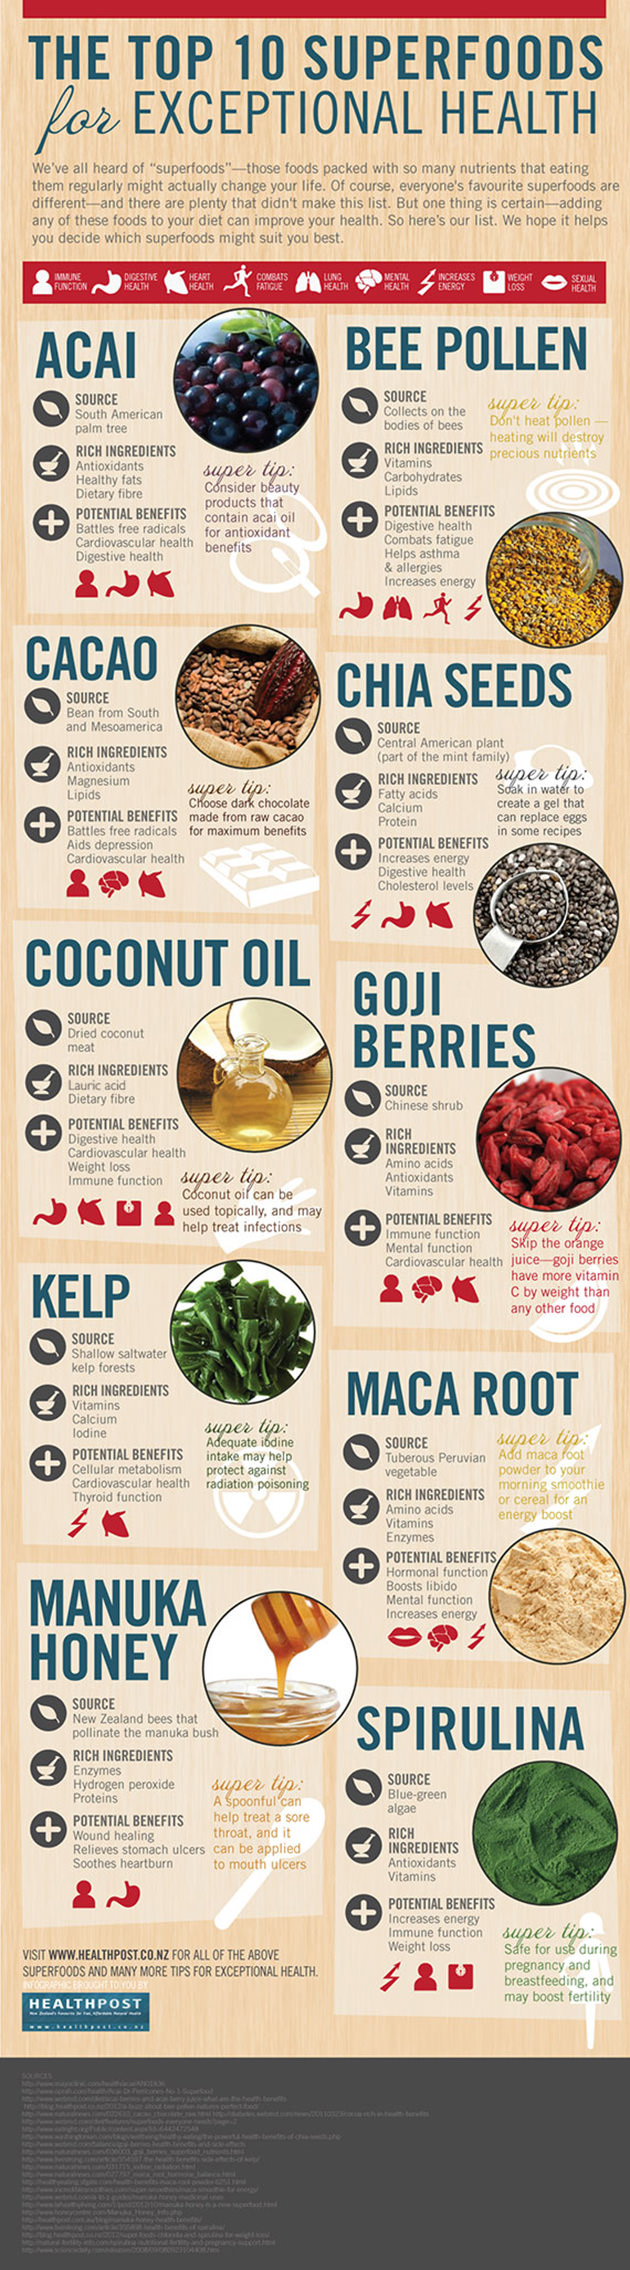 The Top 10 Superfoods for Exceptional Health Infographic